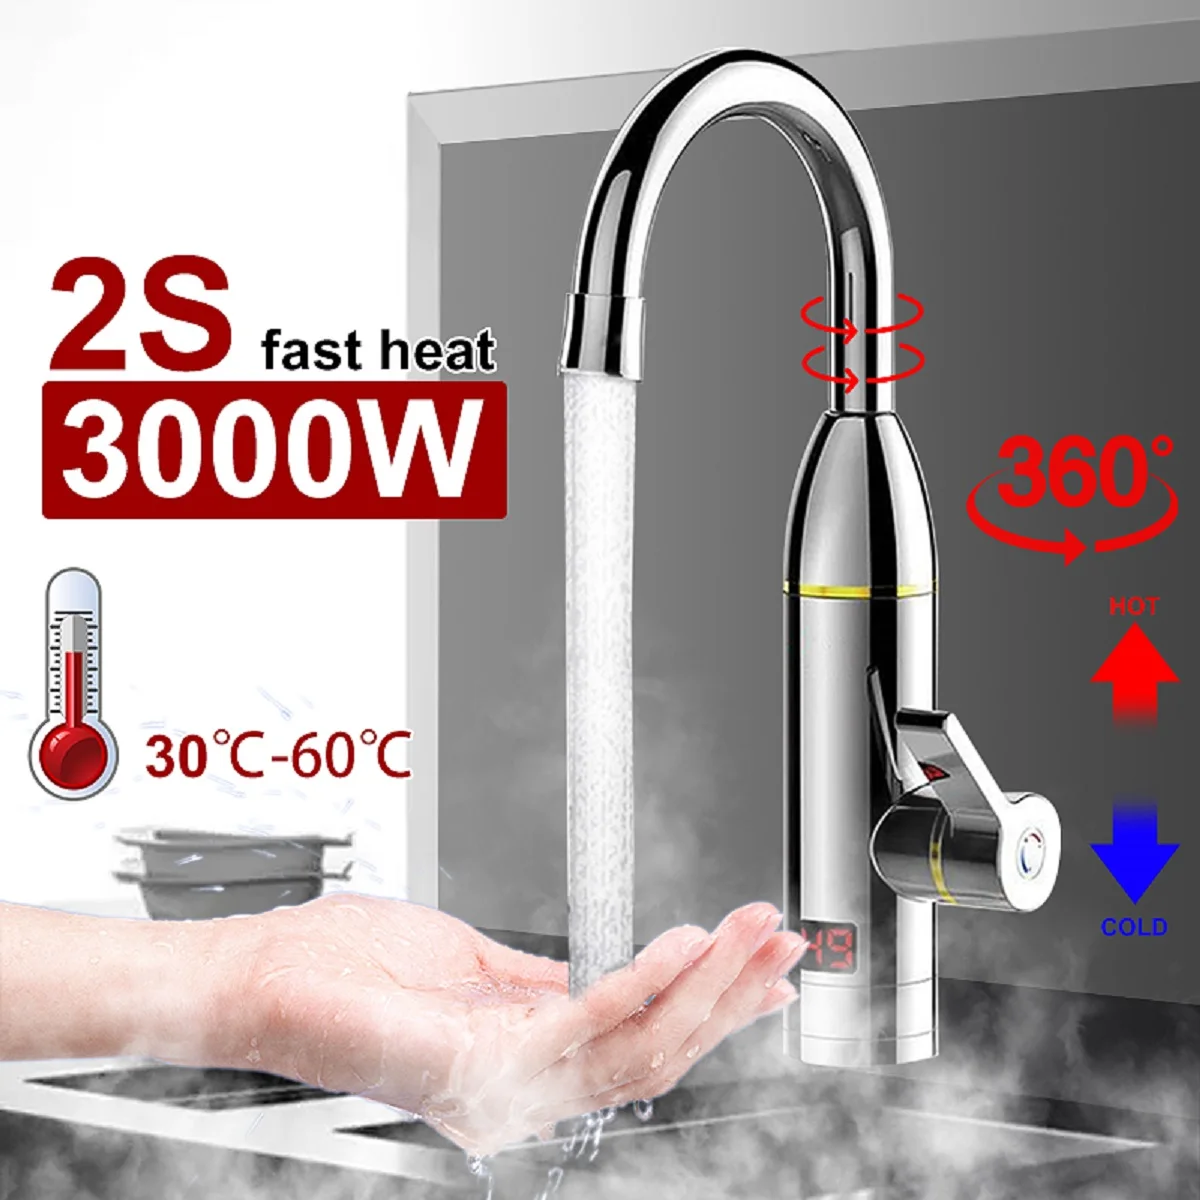 

220V 3000W Kitchen Instant Heating Faucet Heater Hot Cold Dual-Use Tankless Water Quickly Heating Tap Shower with LED Display